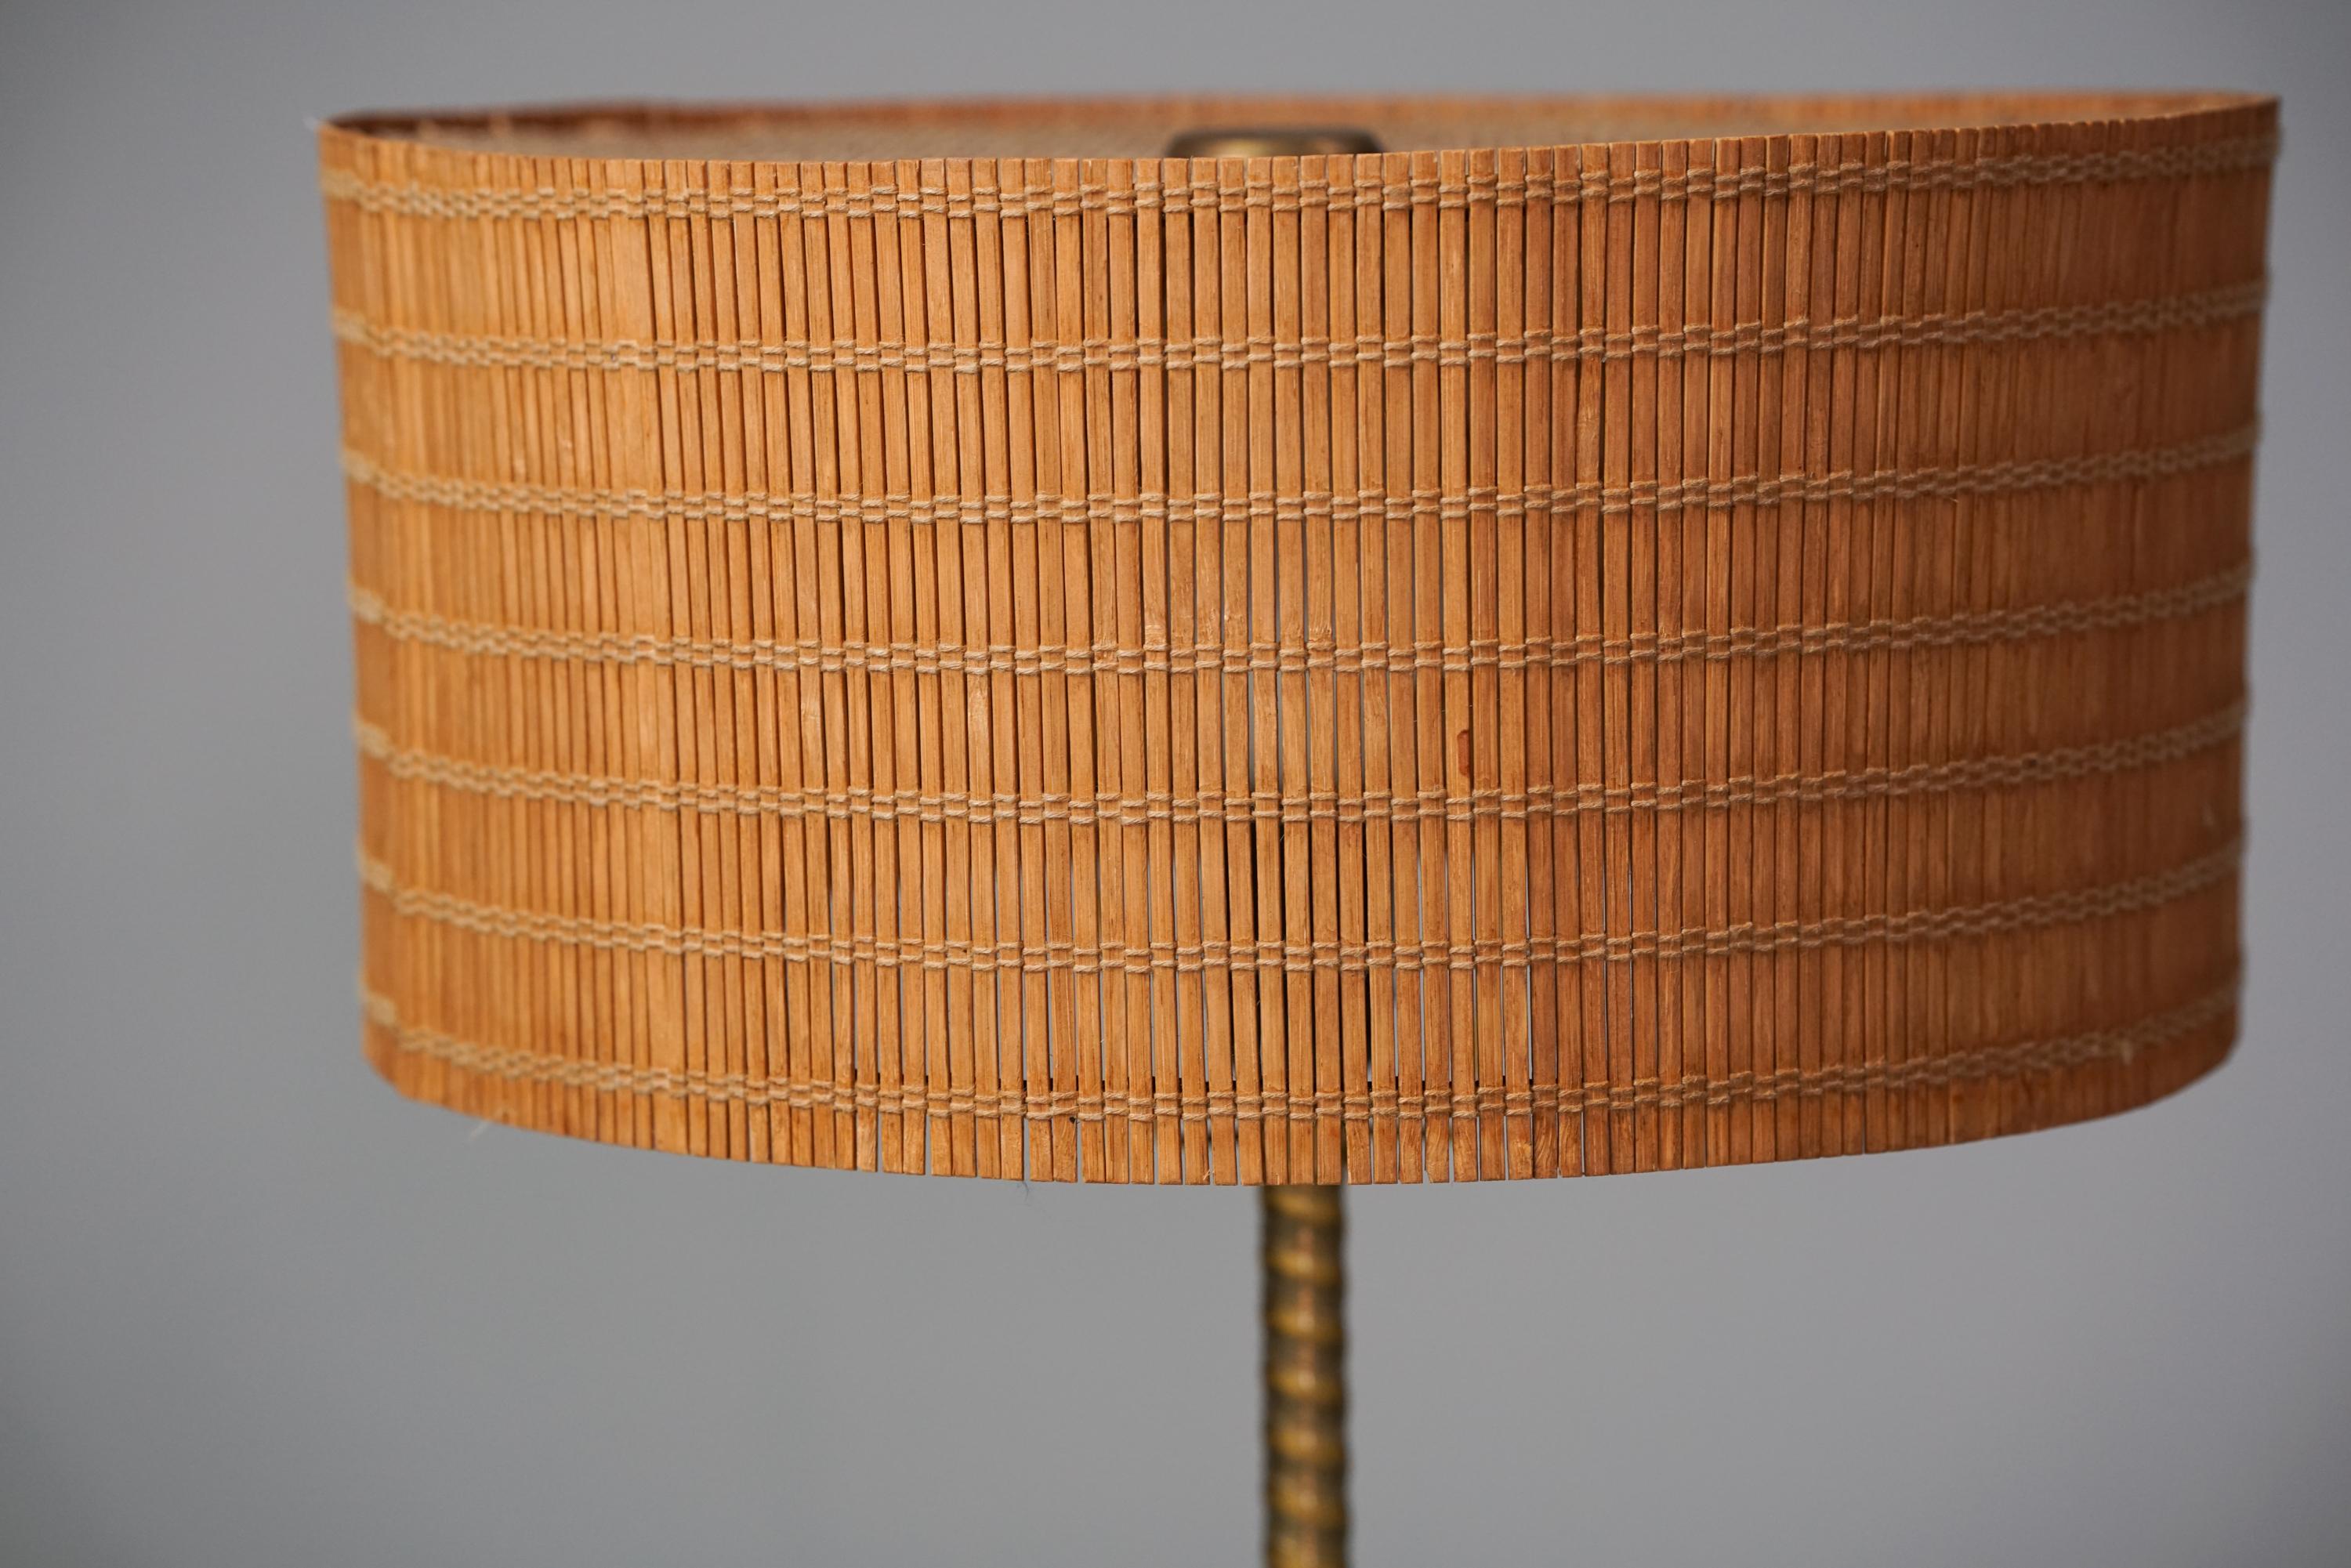 Rare Lisa Johansson-Pape Table Lamp, Orno Oy, 1940/1950s For Sale 1